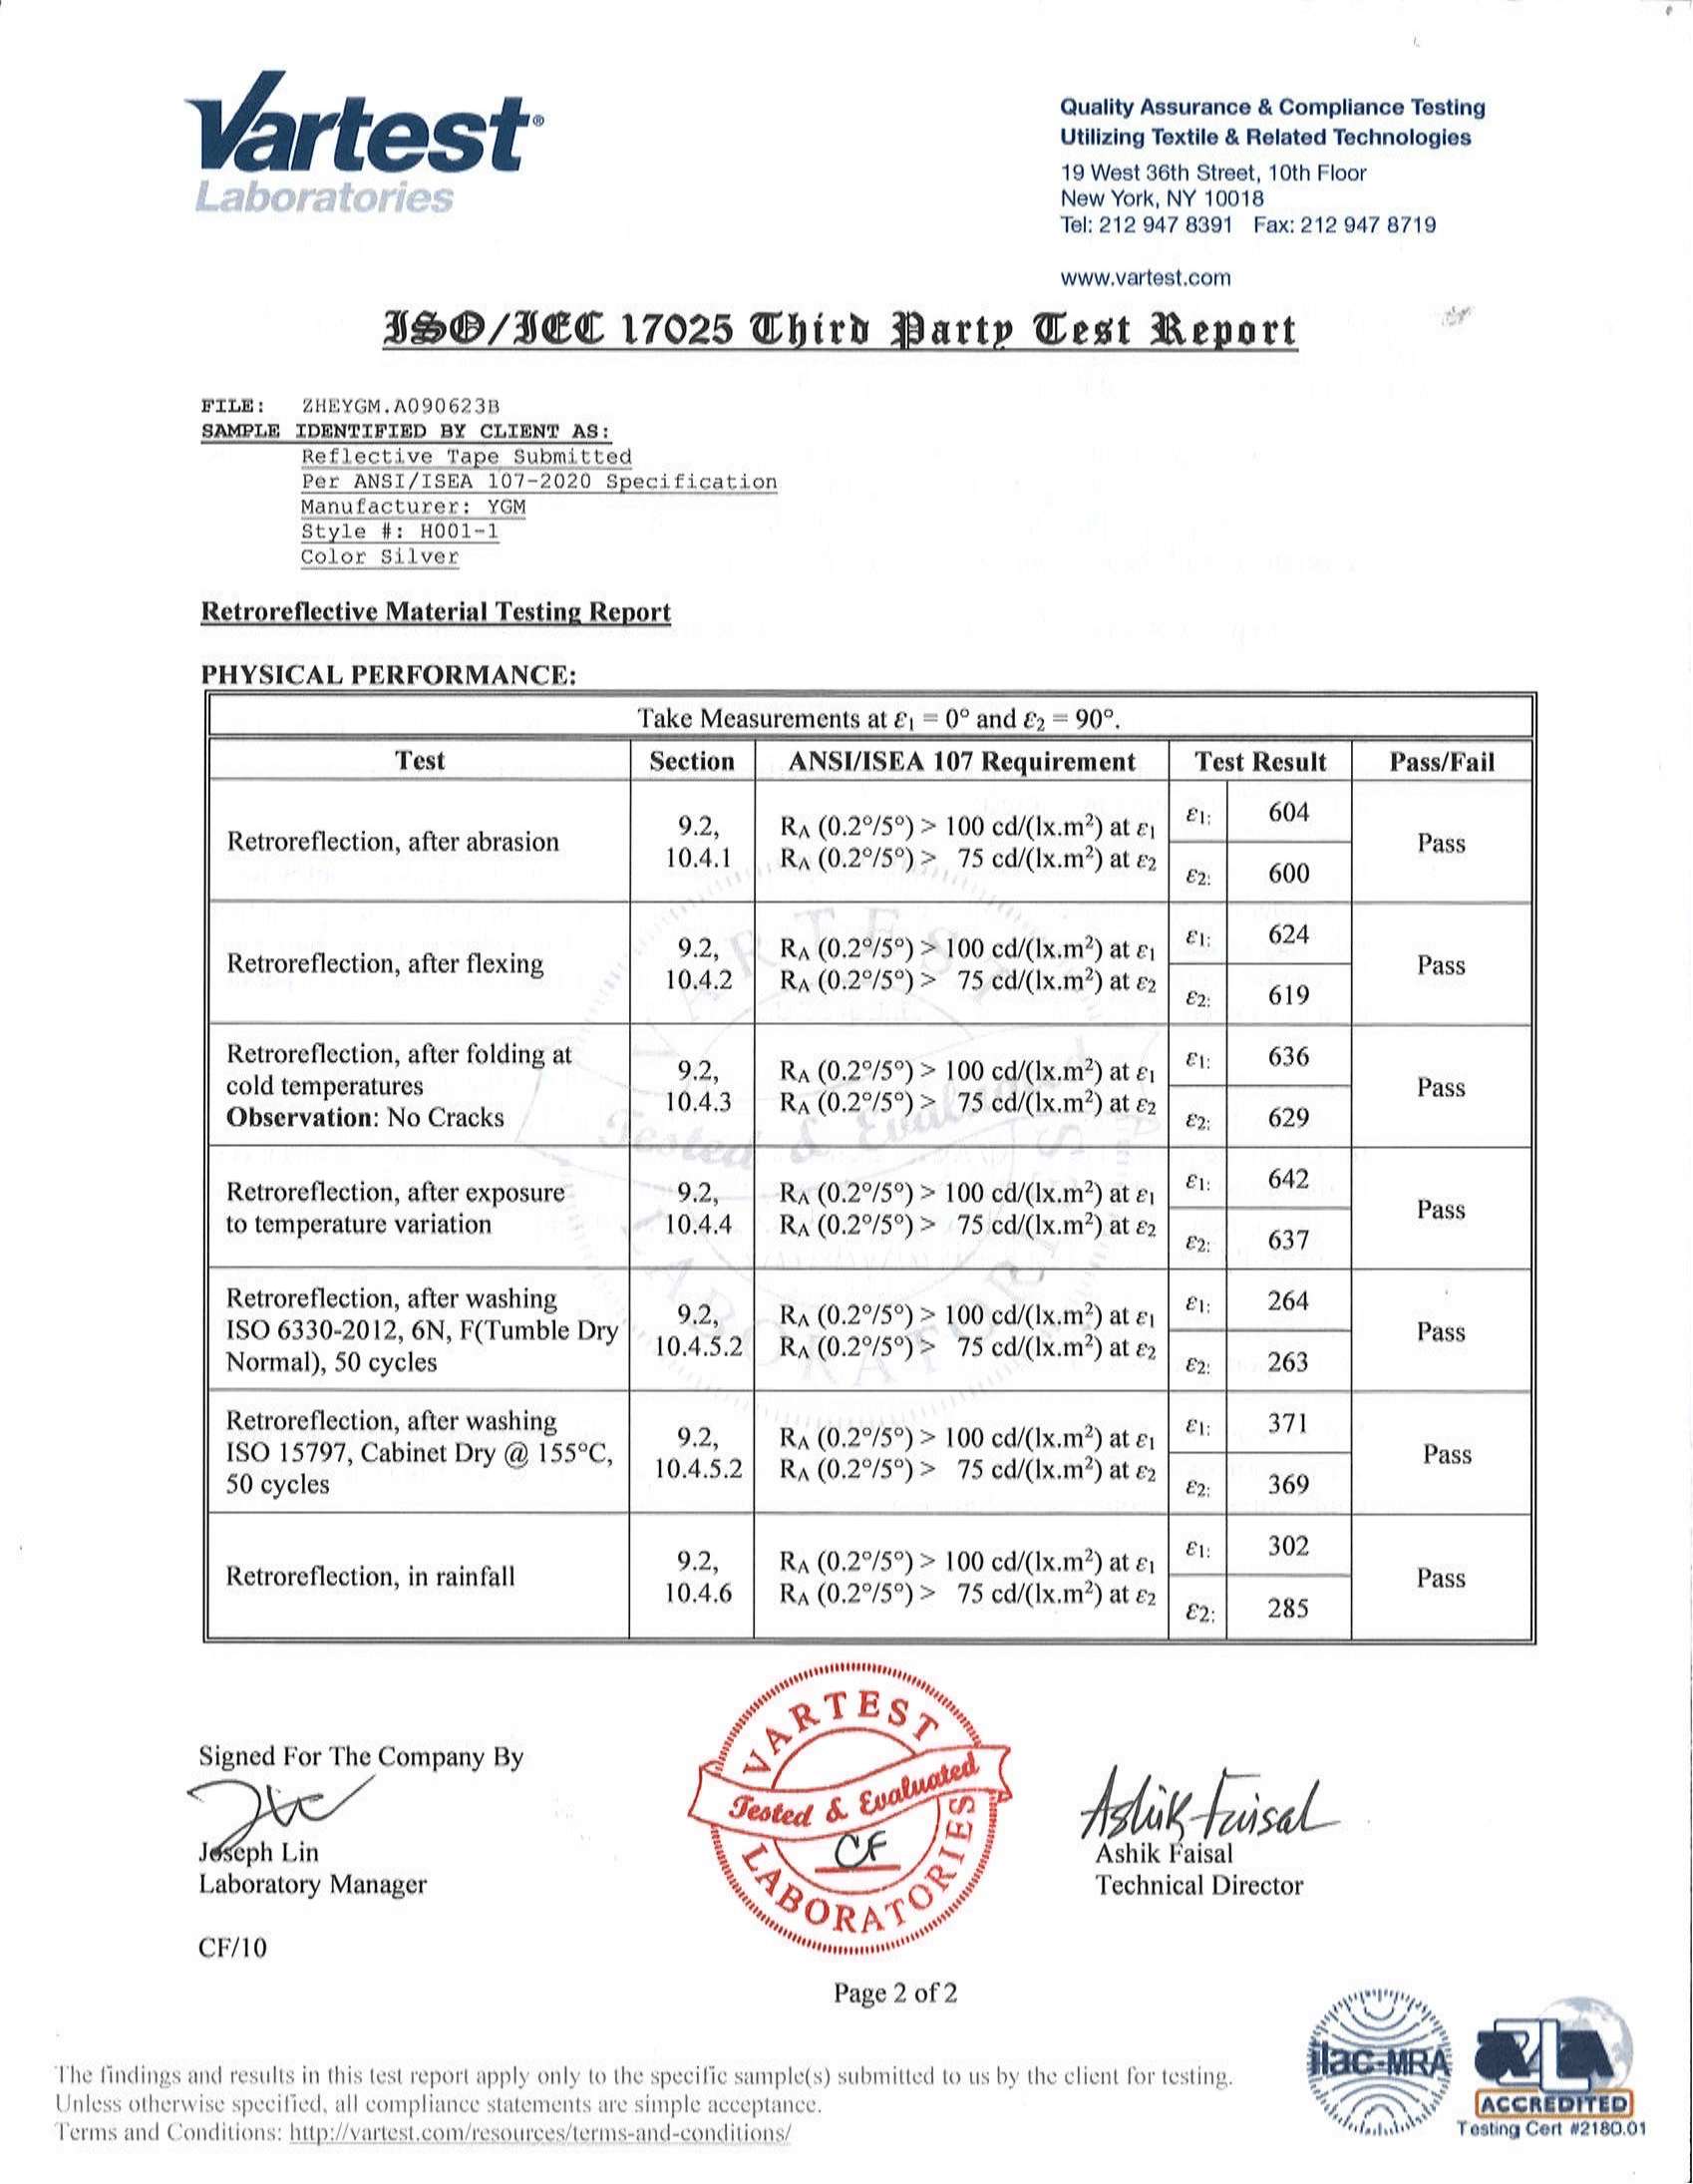 ANSI/ISEA 107 Certificate & Test Report for H001-1 Product4